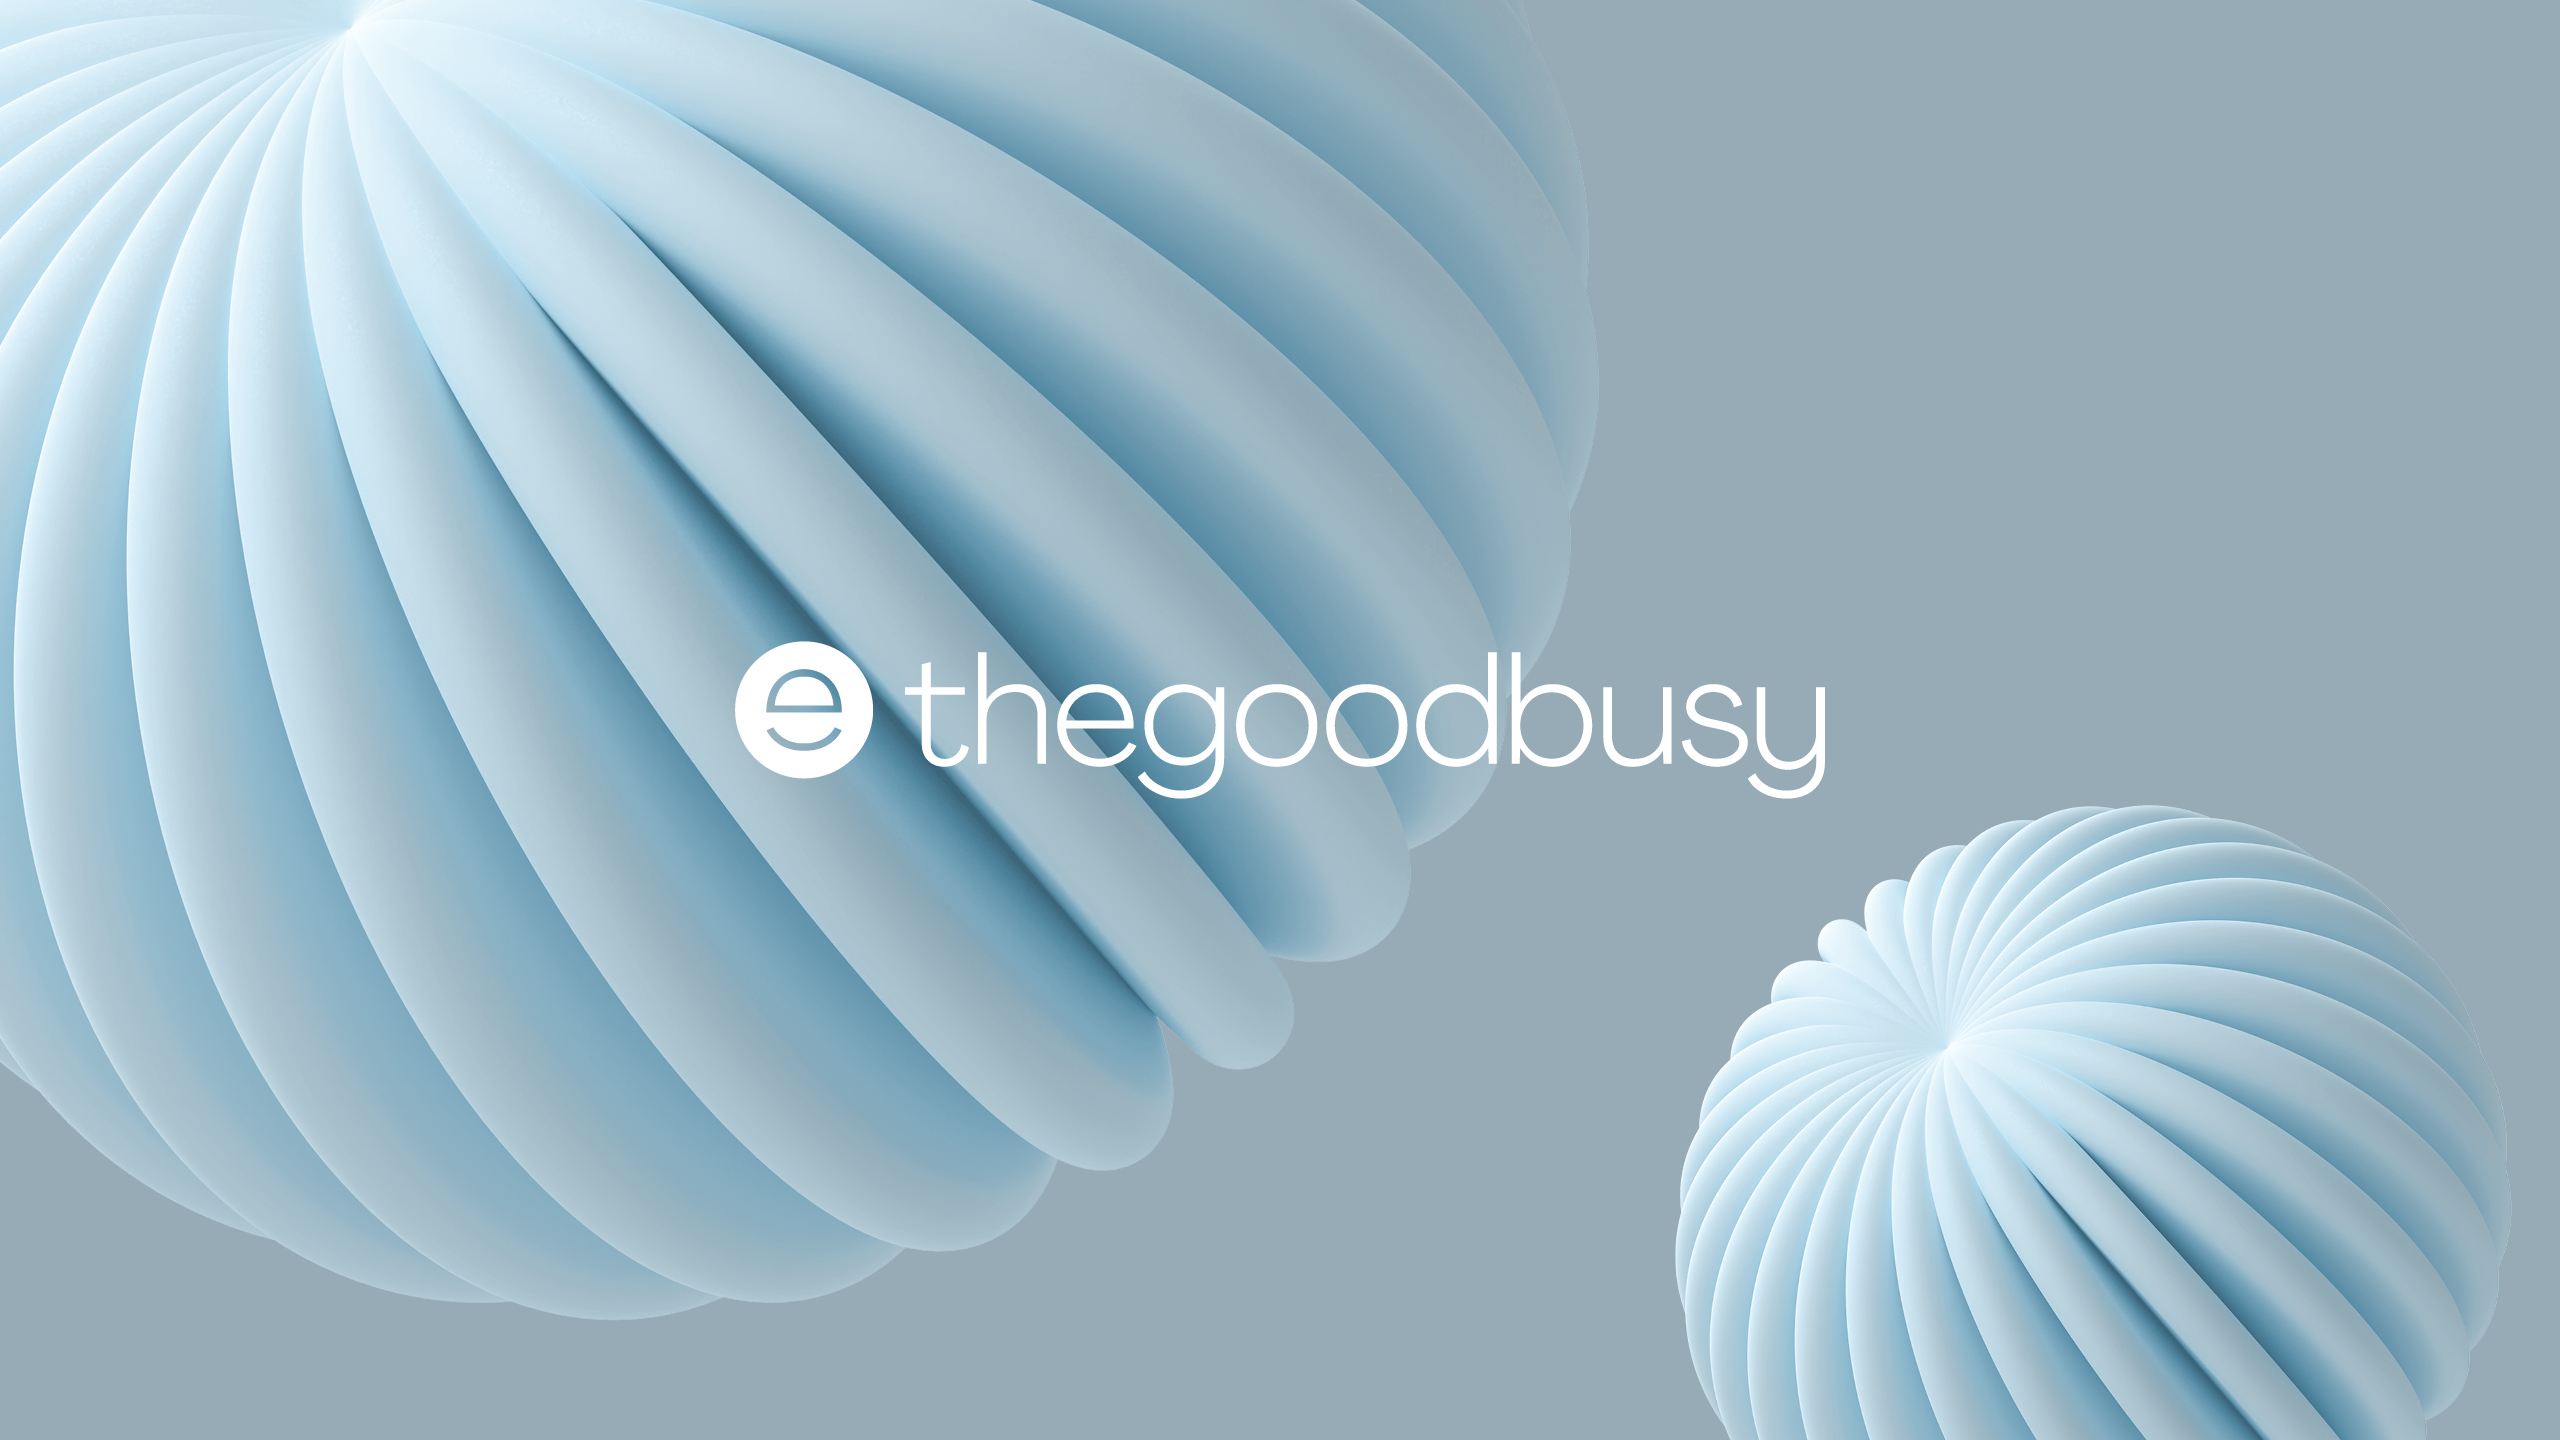 Logo of the Good Busy Company on one of its signature colors